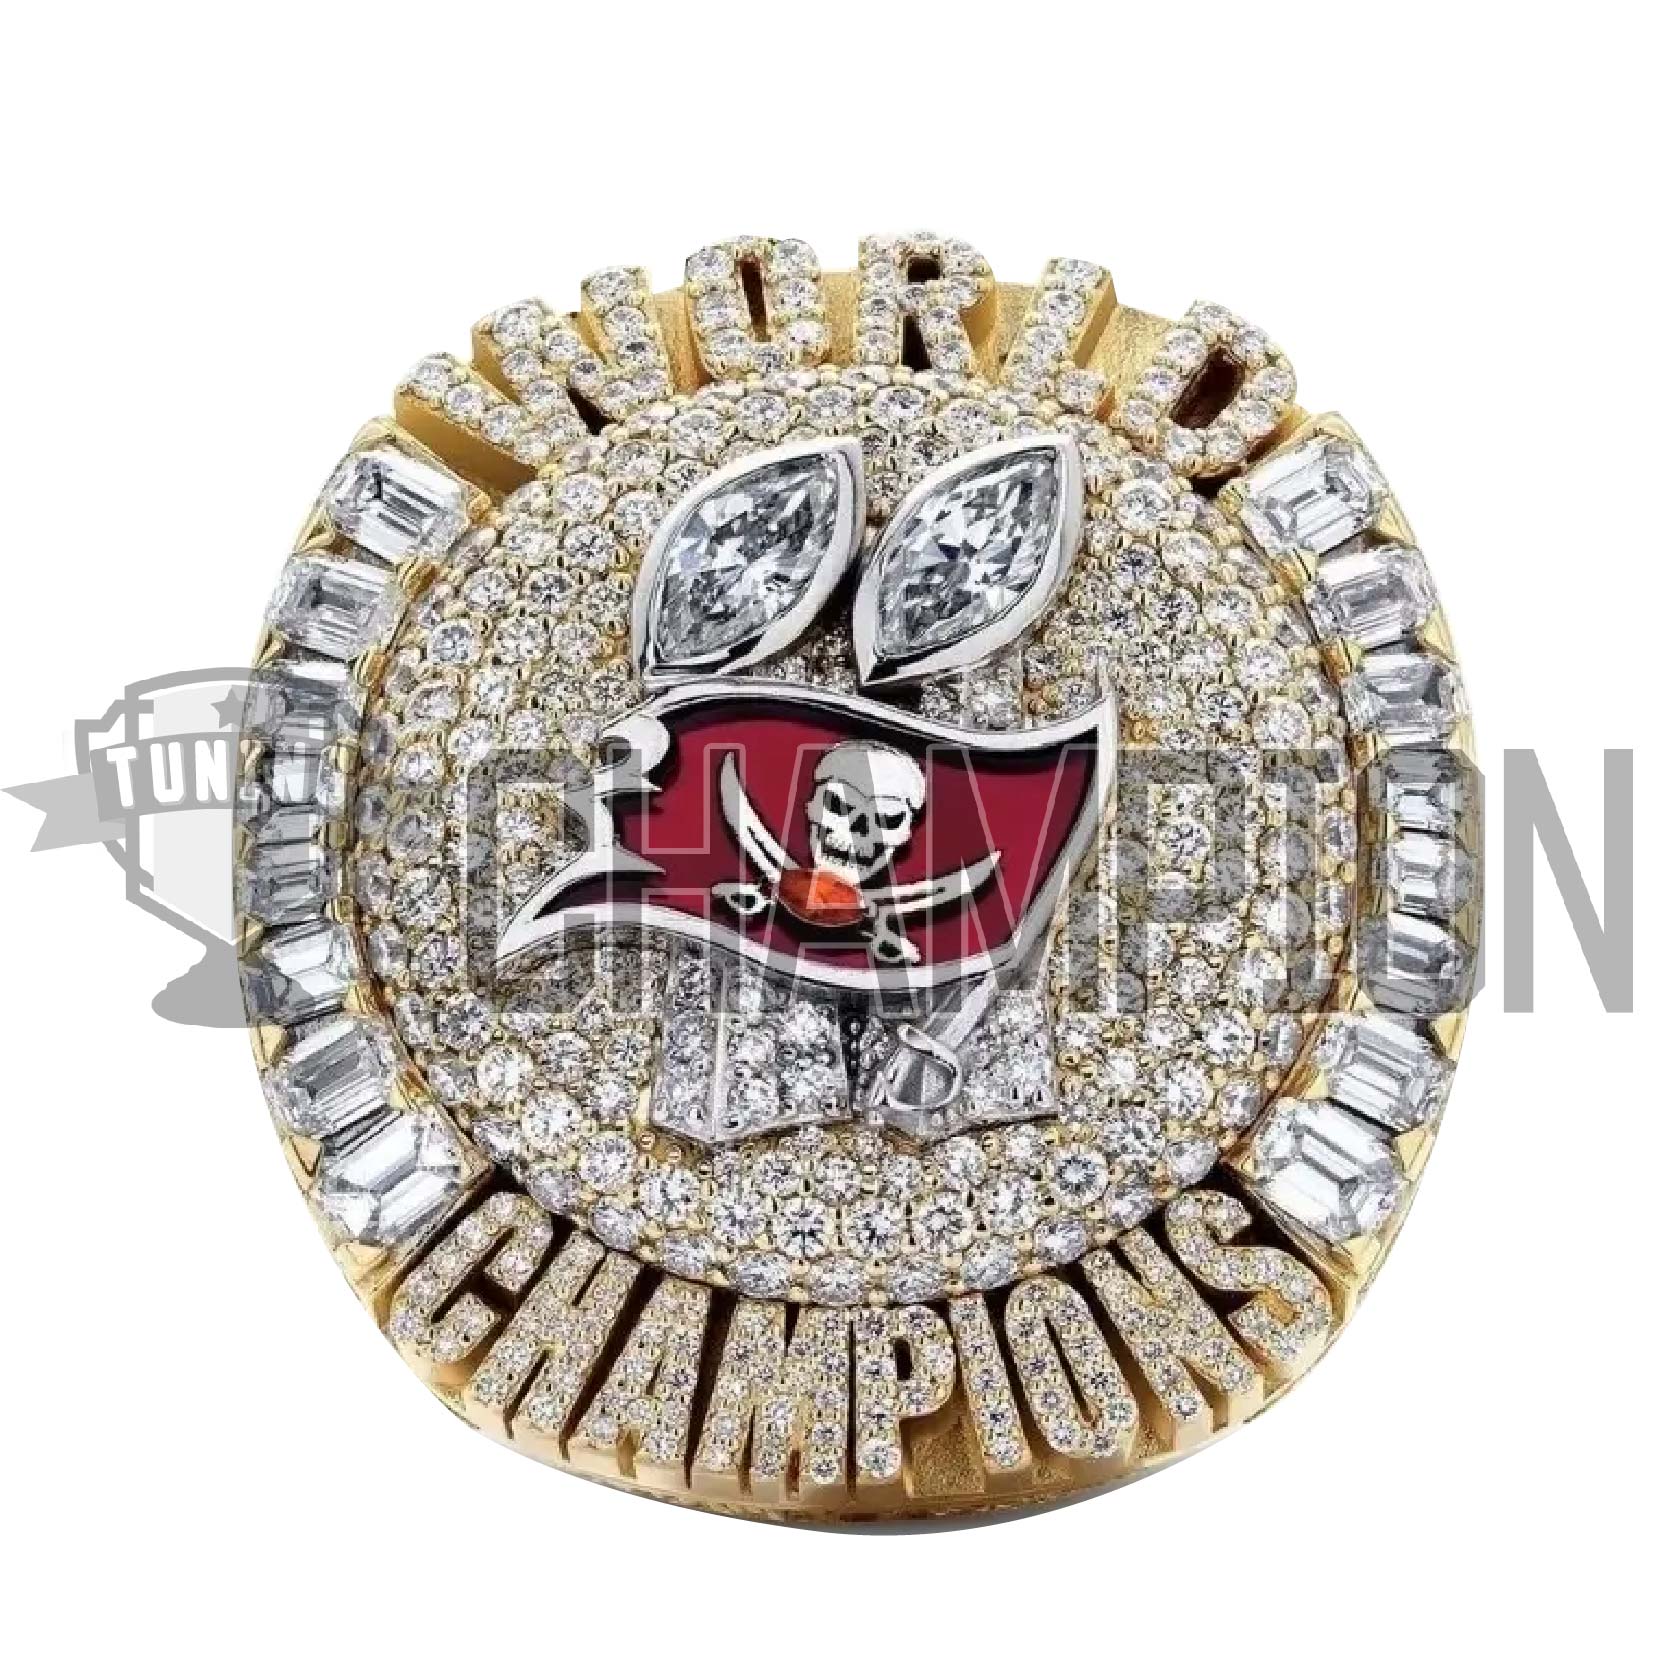 How much is the Buccaneers Super Bowl ring worth?